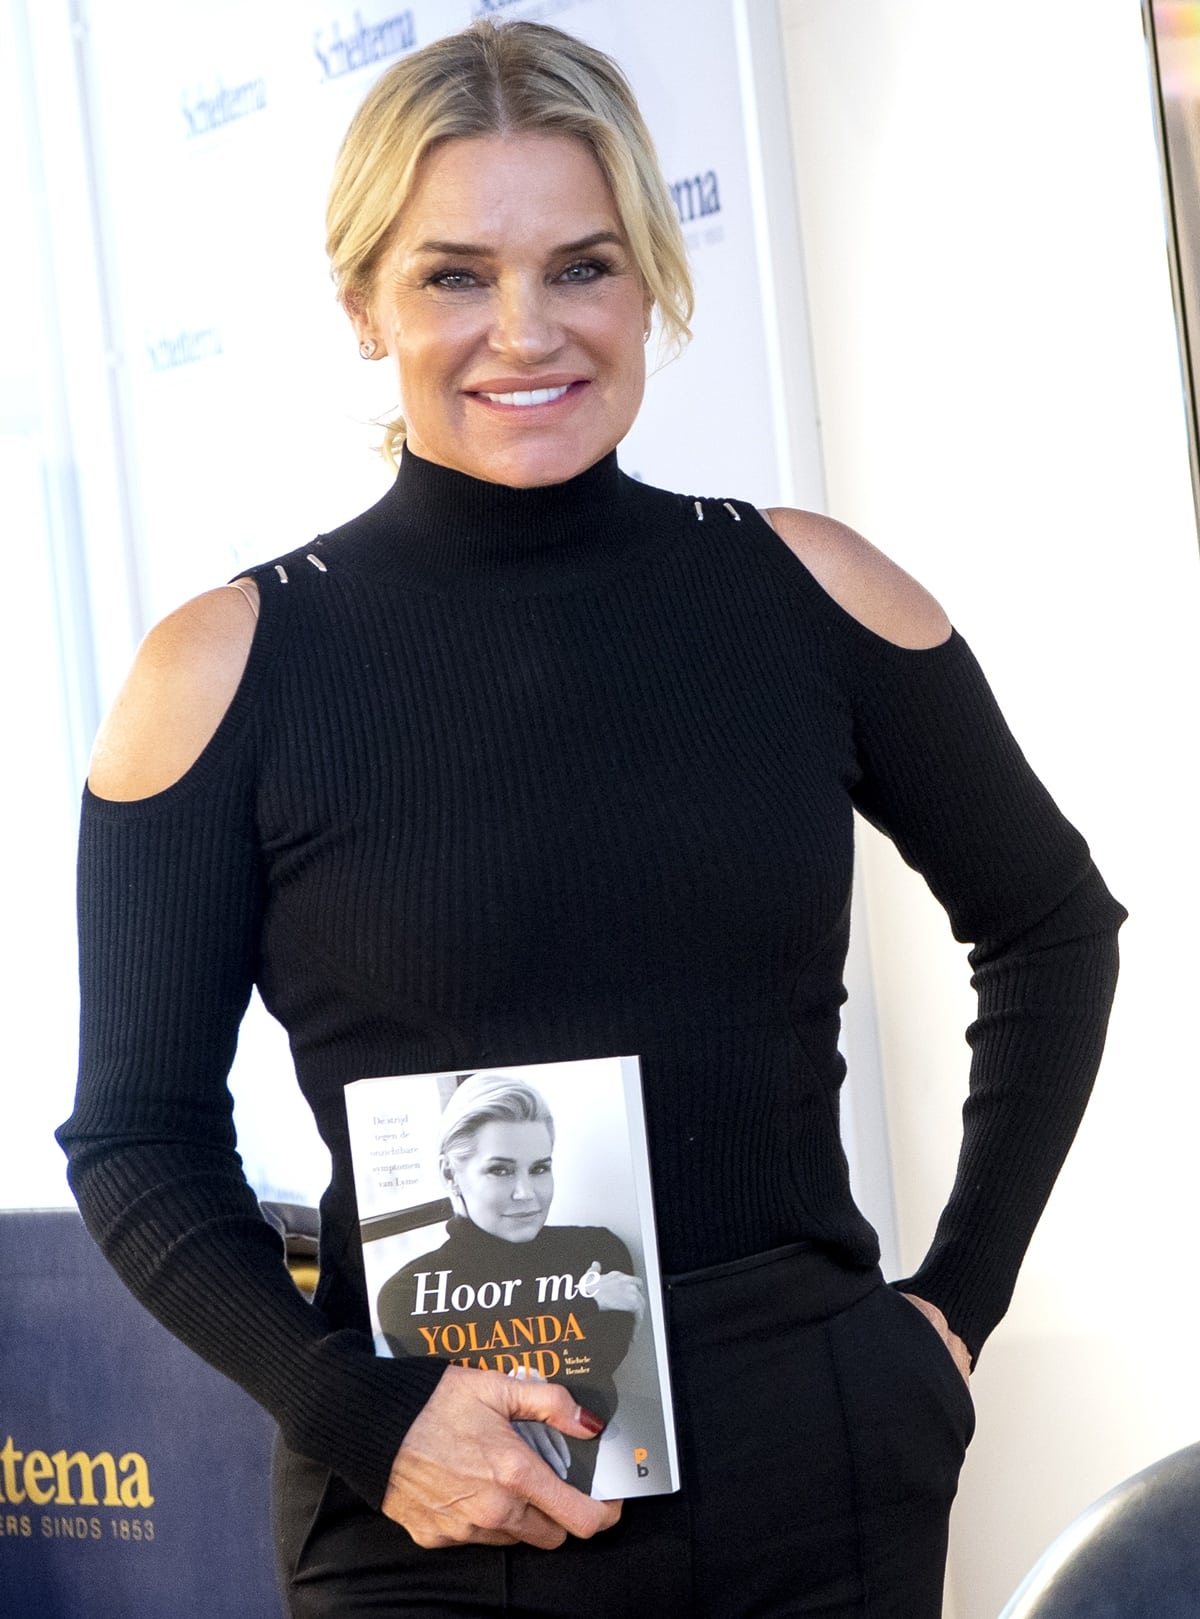 Yolanda Hadid promotes her book "Believe Me: My Battle with the Invisible Disability of Lyme Disease"